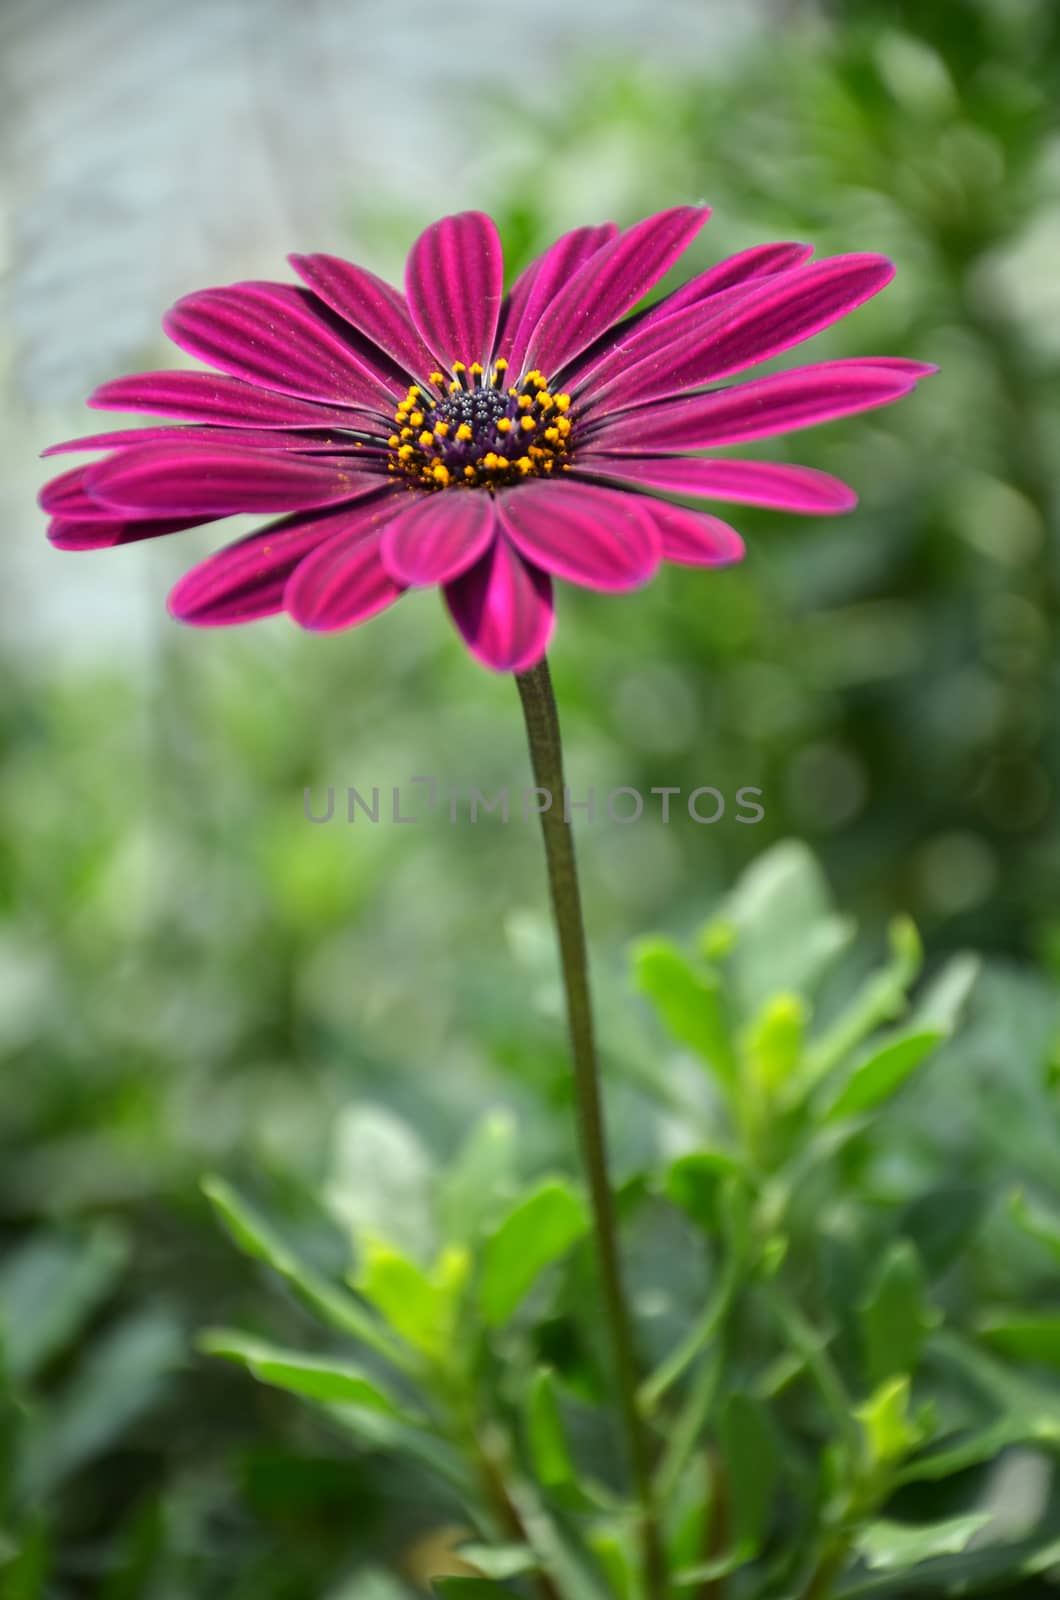 Osteospermum or Cape Daisy is a native to South Africa that loves a sunny position